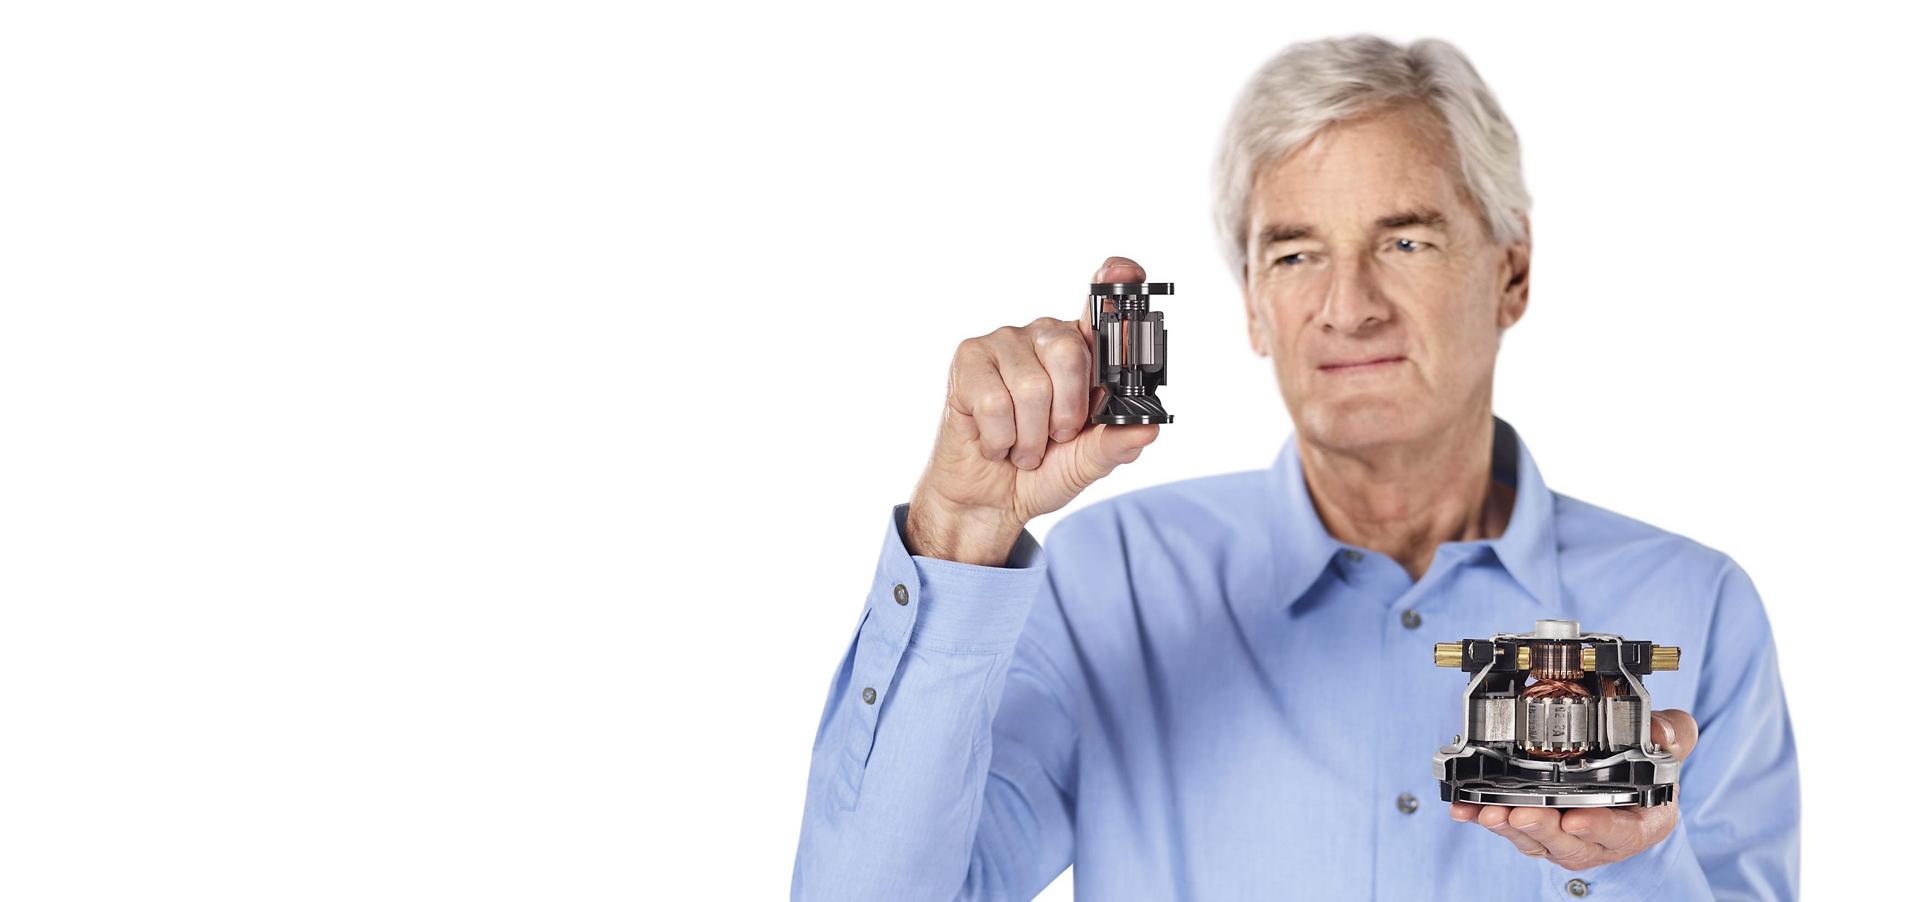 Dyson's founder and engineer, James Dyson